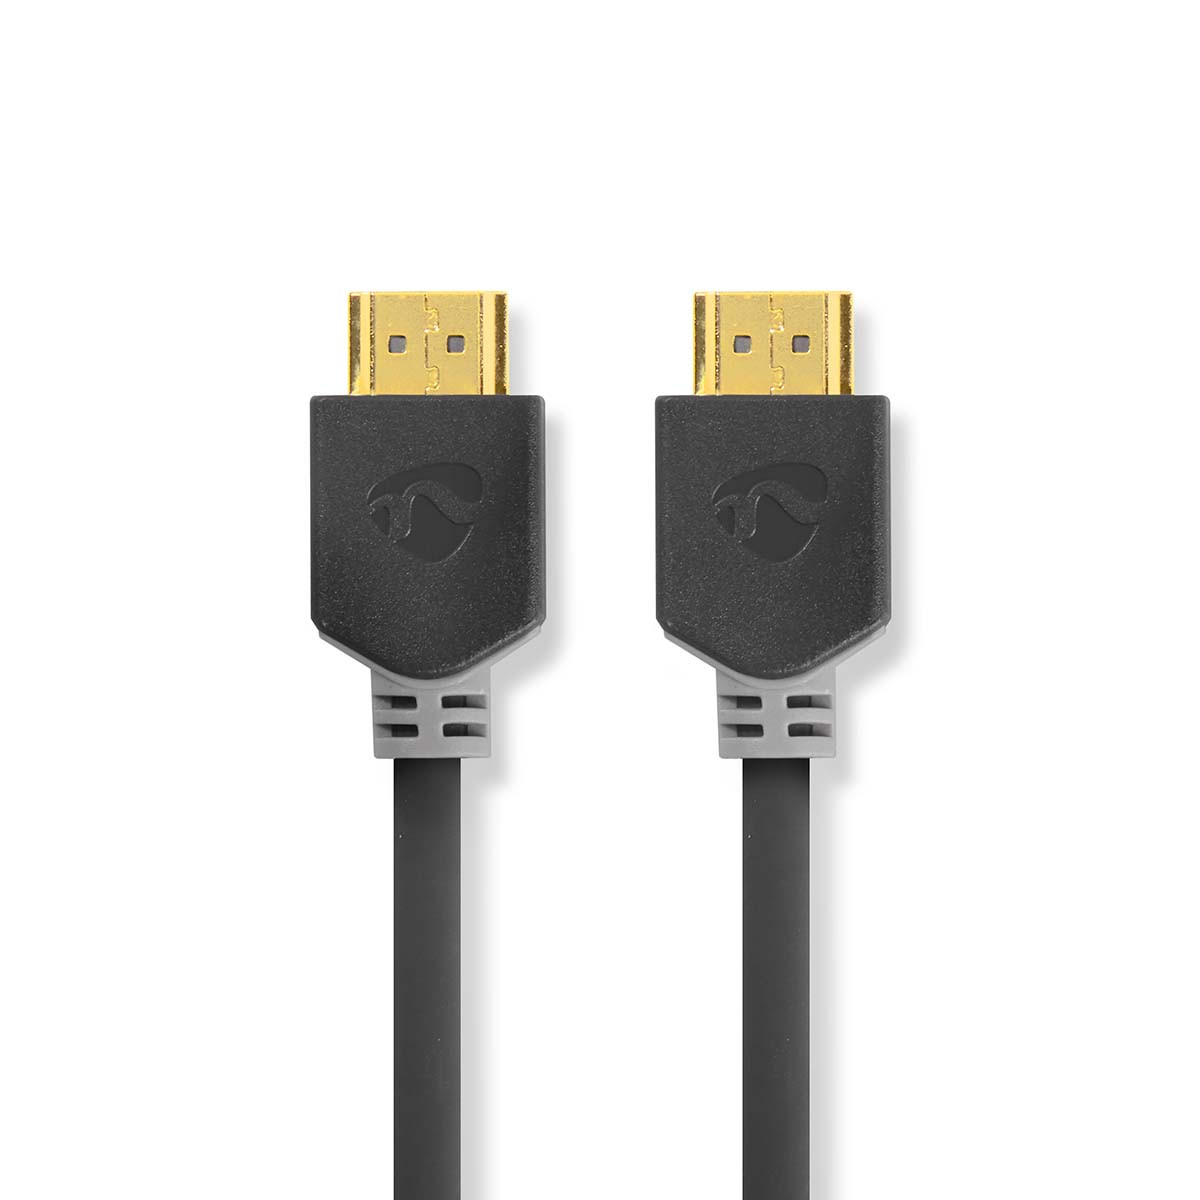 High Speed HDMI-kabel met Ethernet | HDMI-connector - HDMI-connector | 10 m | Antraciet